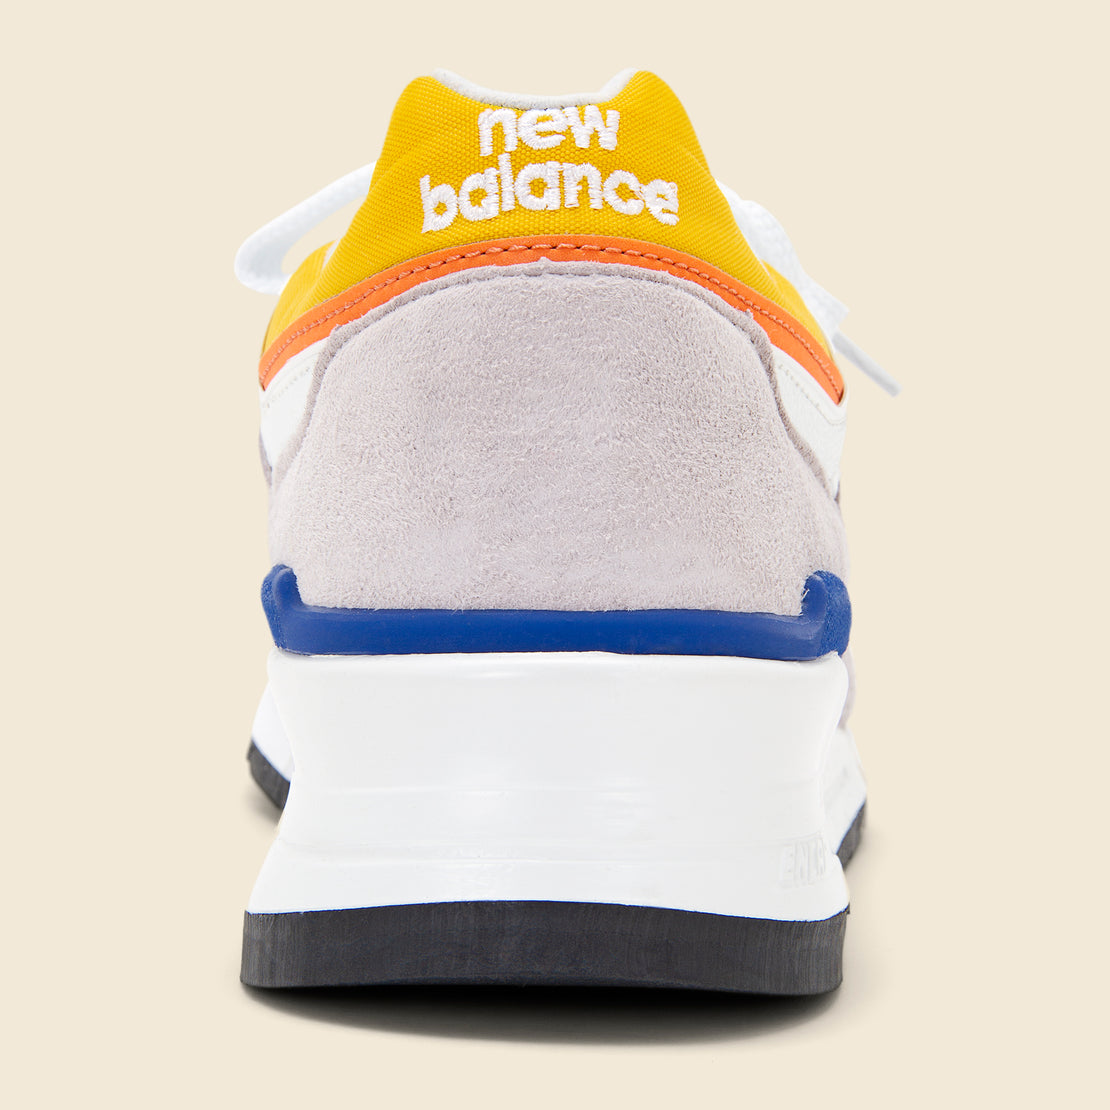 997 Sneaker - Grey/Orange - New Balance - STAG Provisions - Shoes - Athletic